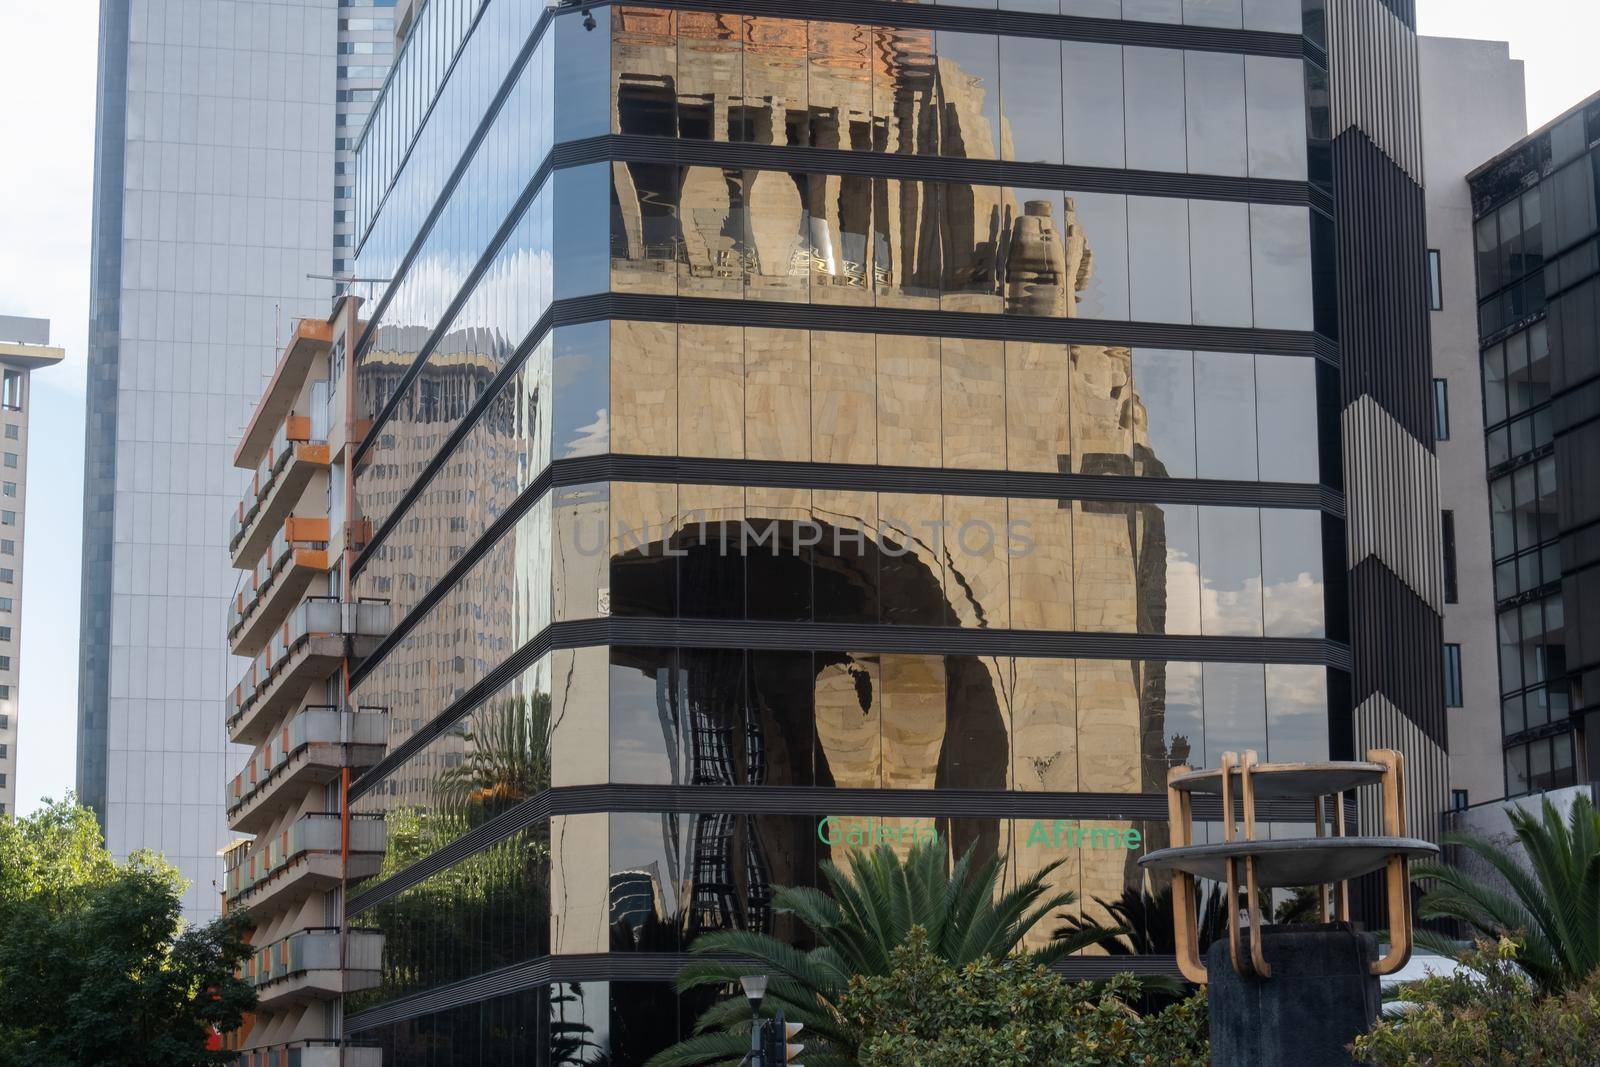 Reflection of the Monument to the Revolution on the windows of tall and modern building. Mirror-like building reflecting triumphal arch from Mexico City. Mexican landmarks